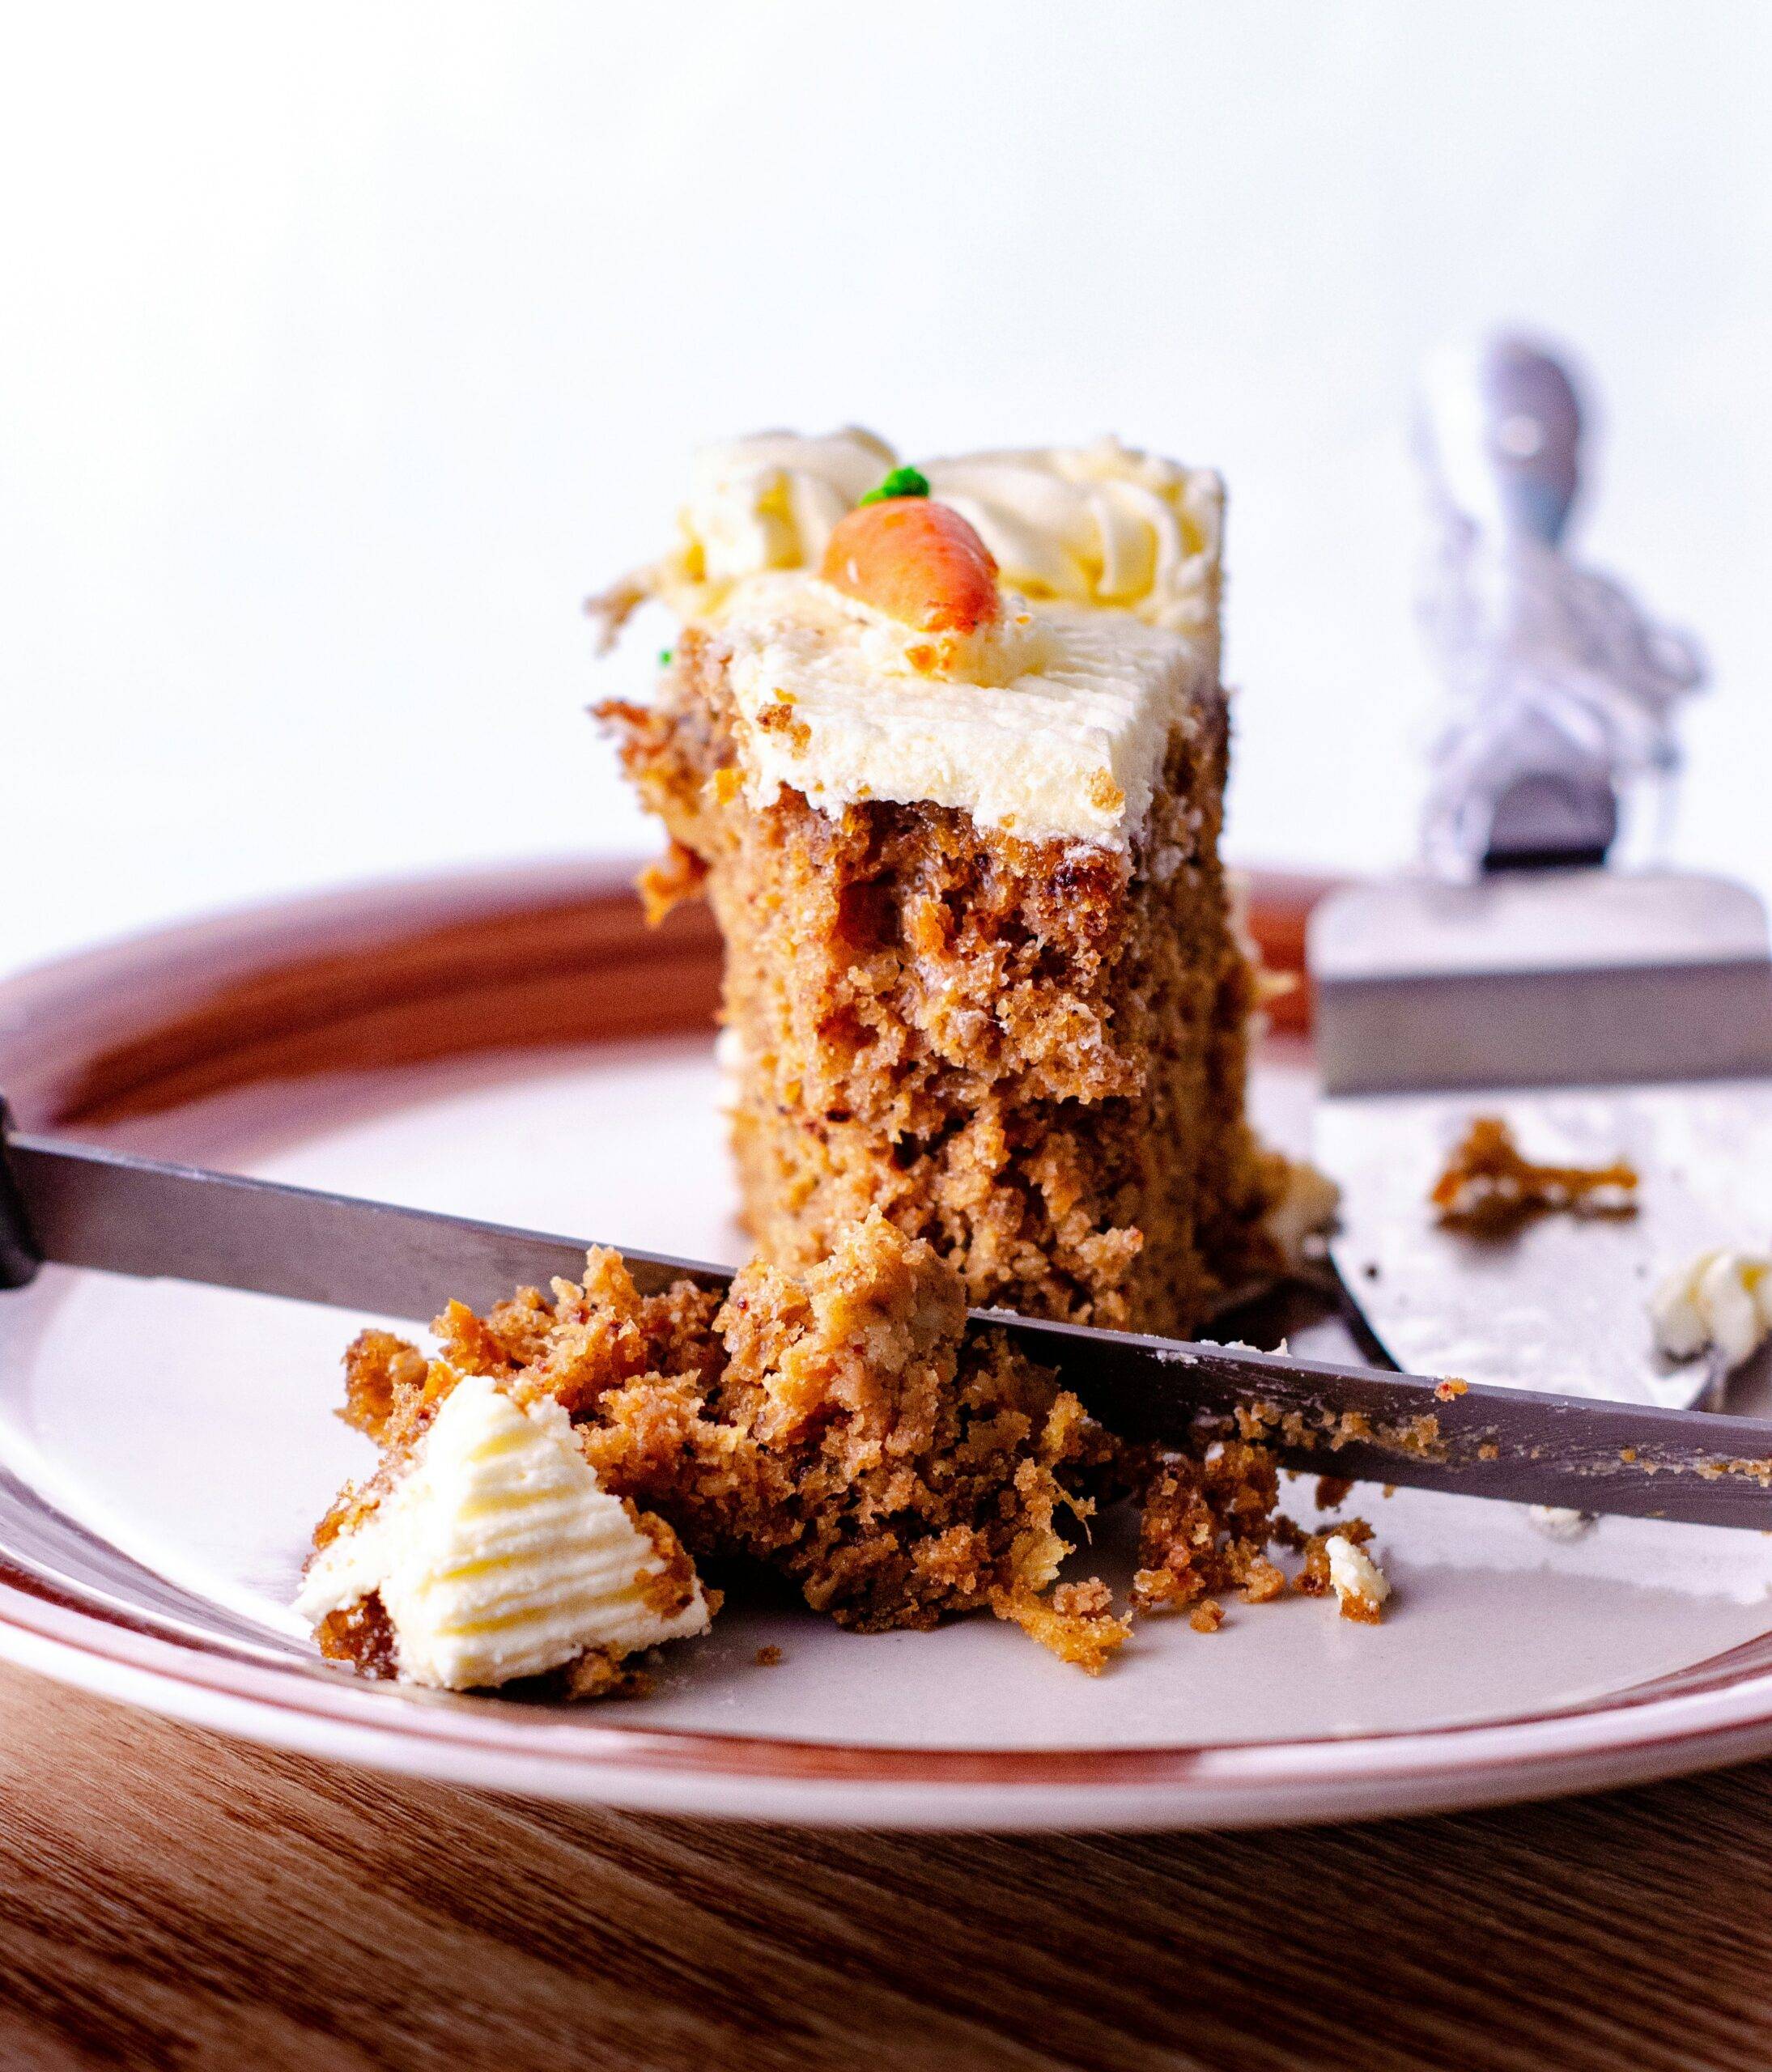 Popular Easter Favorite: The Amazing Carrot Cake